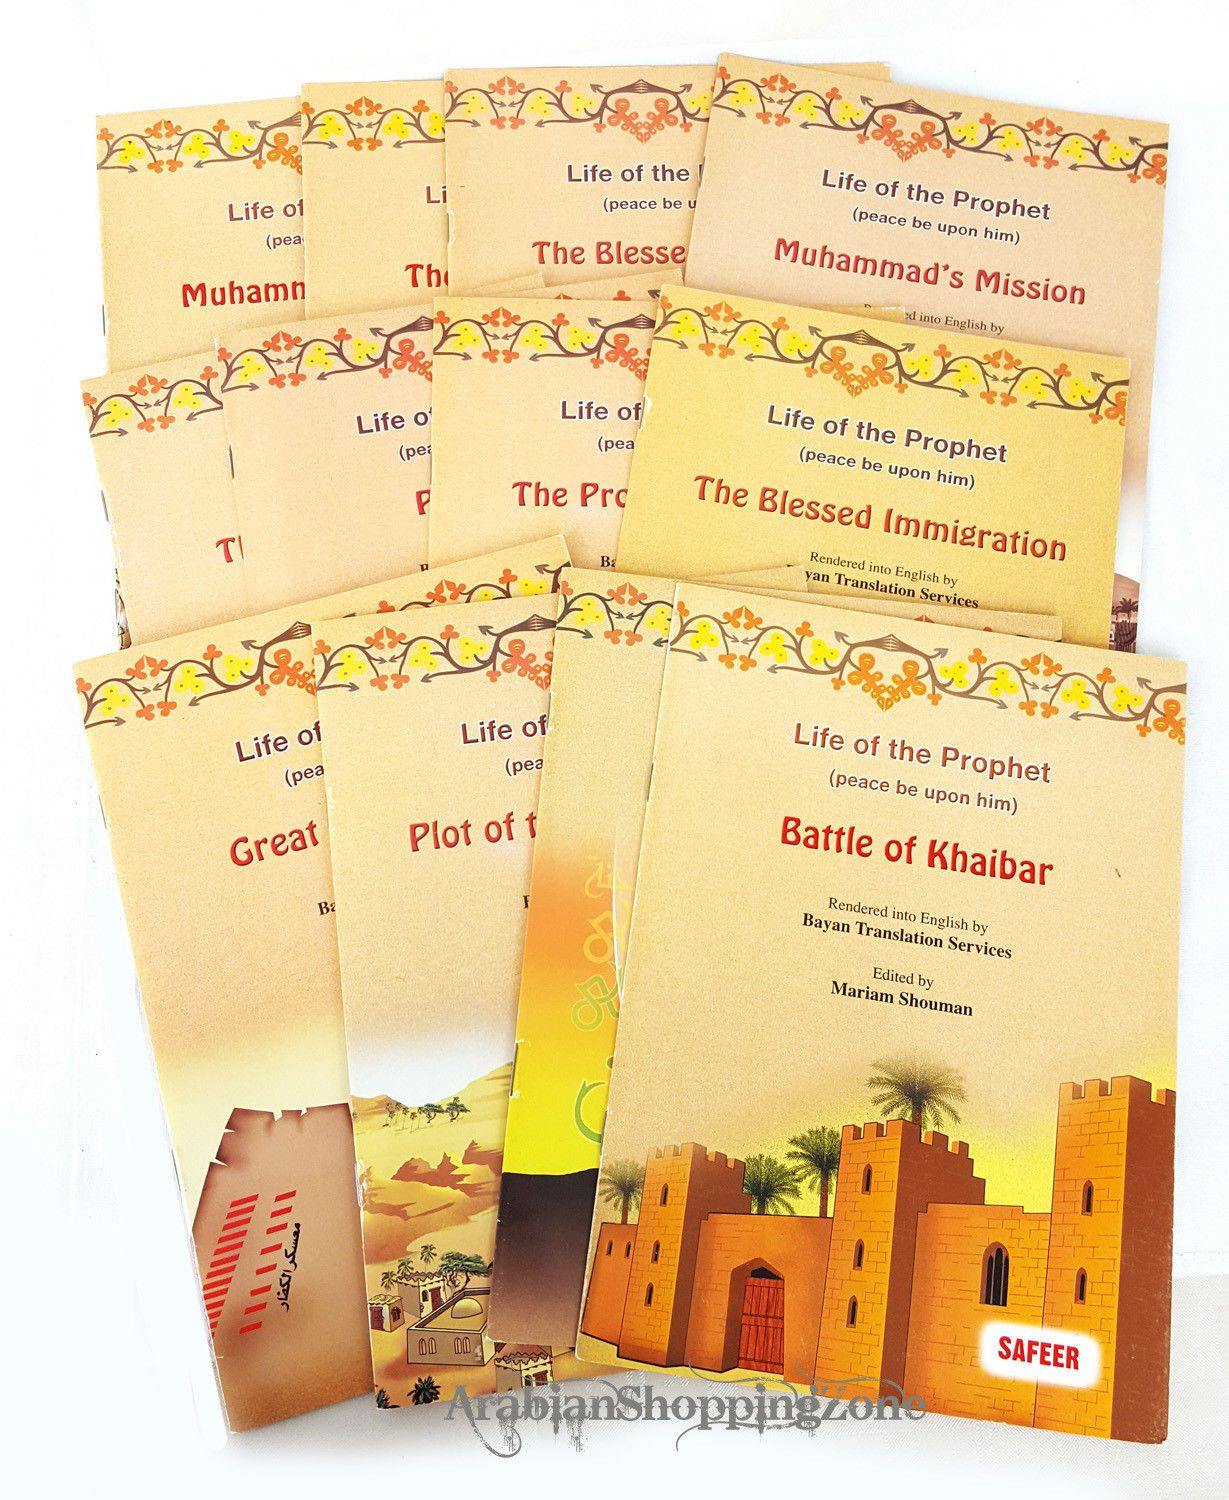 Life of The Prophet Peace be upon him - Series 12 books (English only) - Arabian Shopping Zone